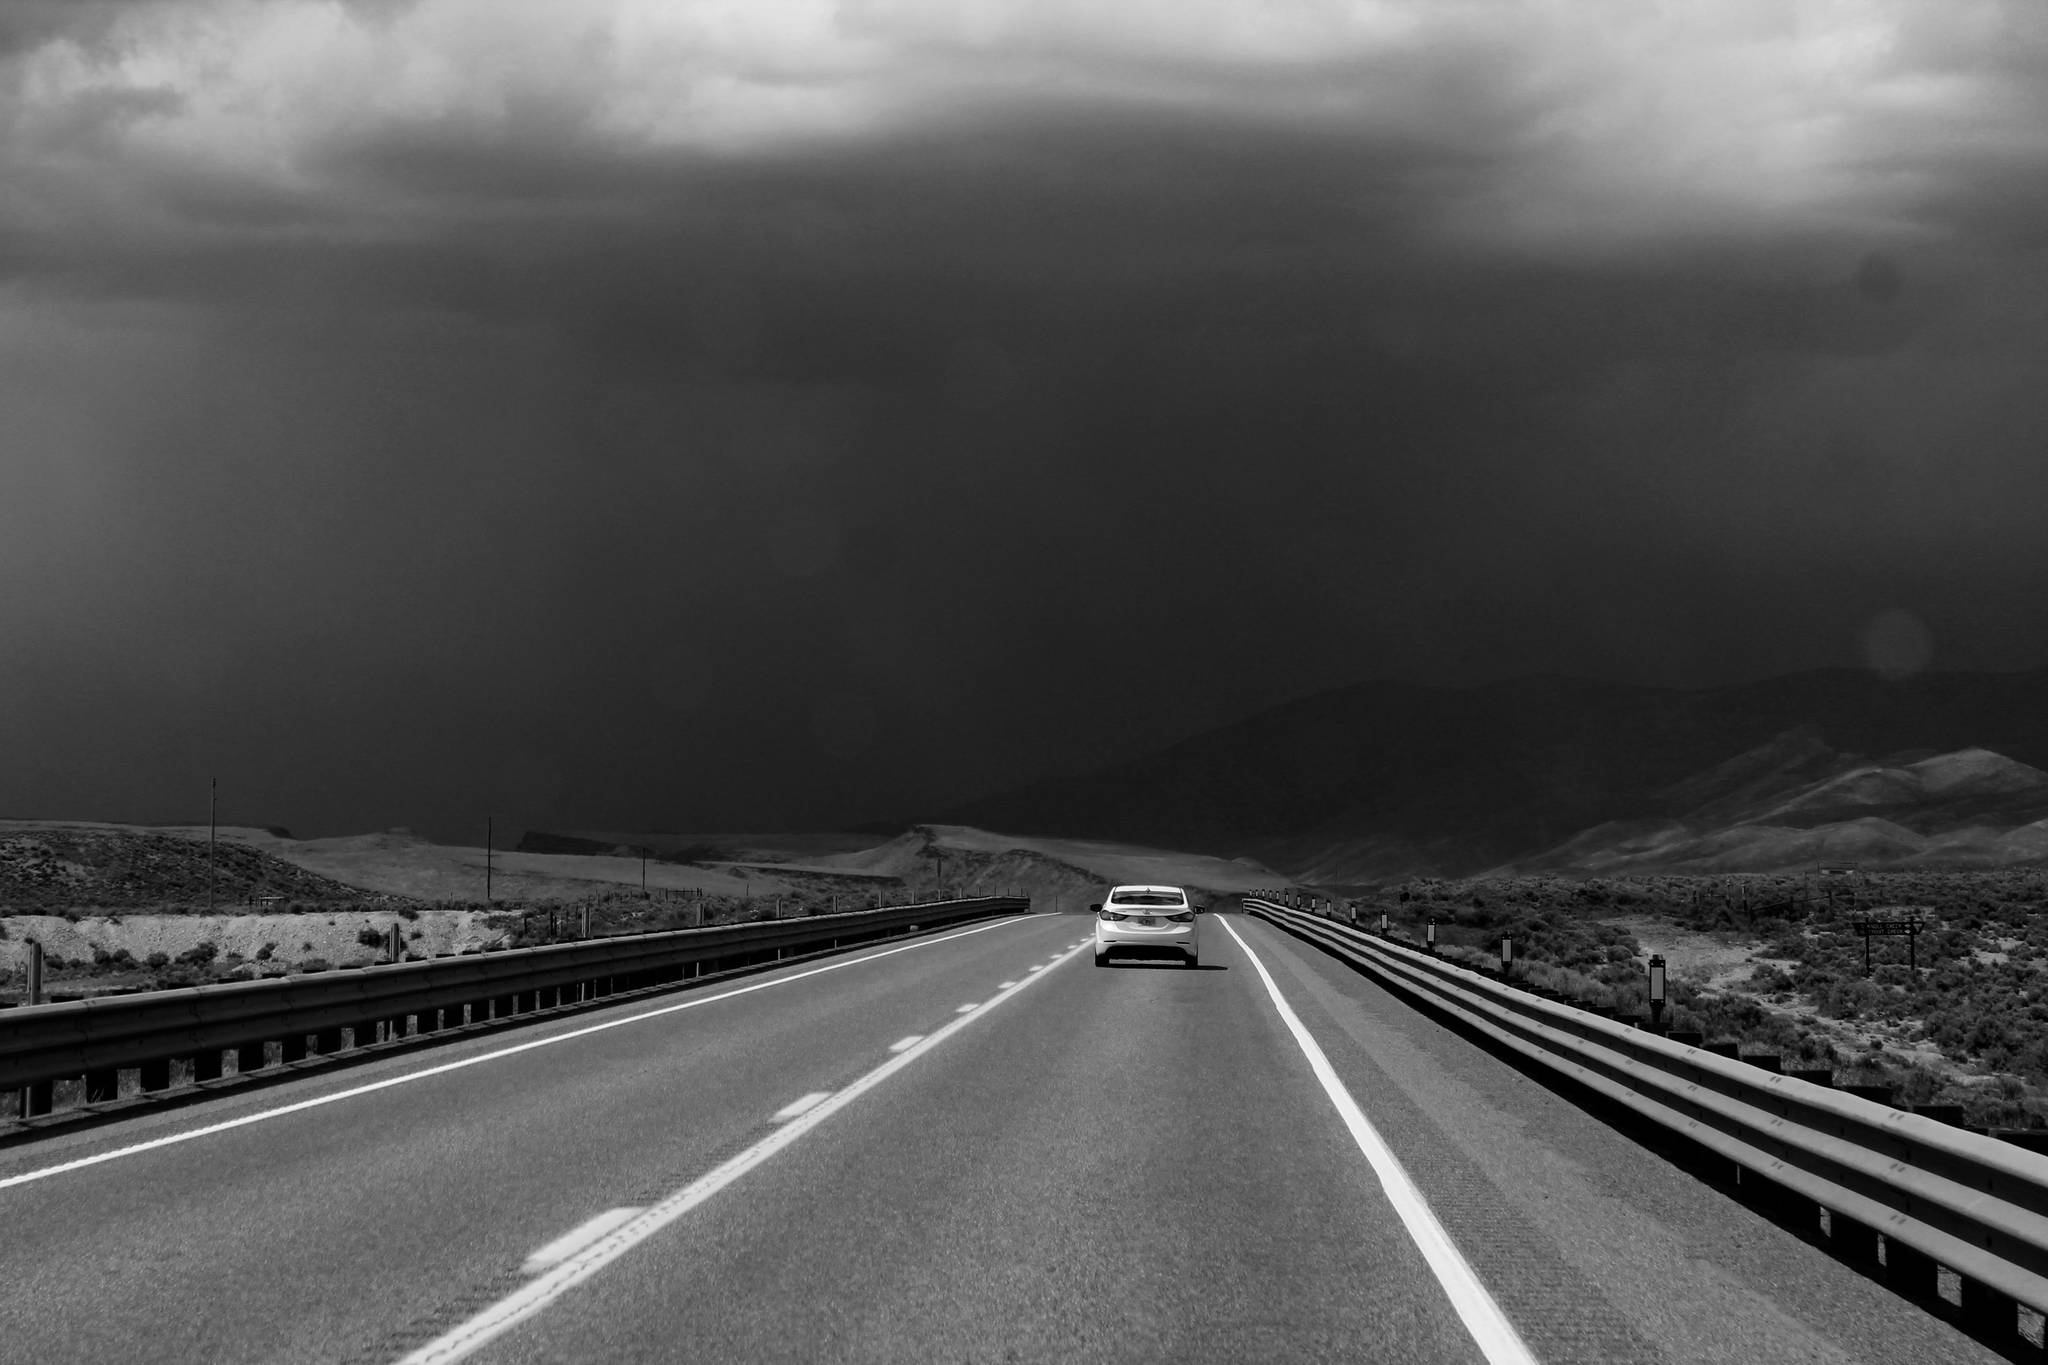 A thunderstorm develops near the Nevada and Idaho border. Photo by Jeff Lund.